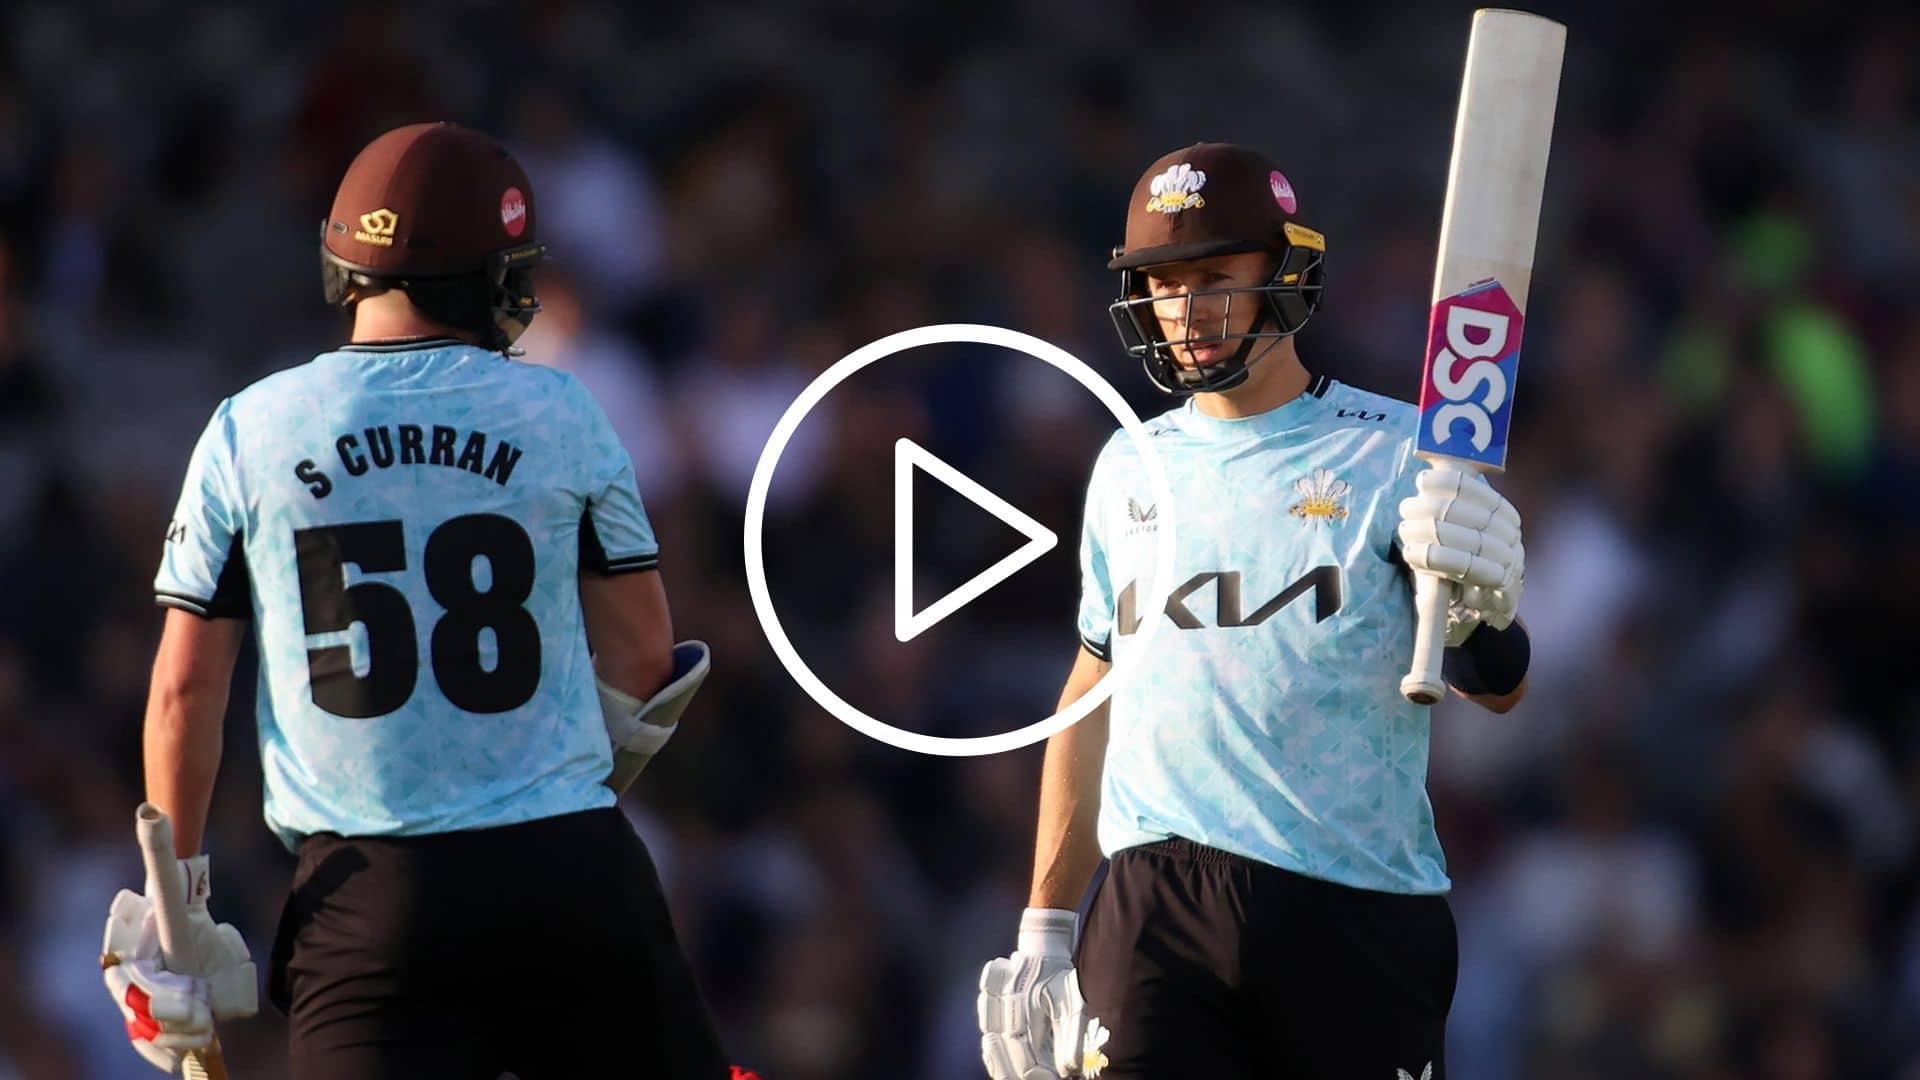 [Watch] Curran Amasses Middlesex Bowler With Five Fours in an Over